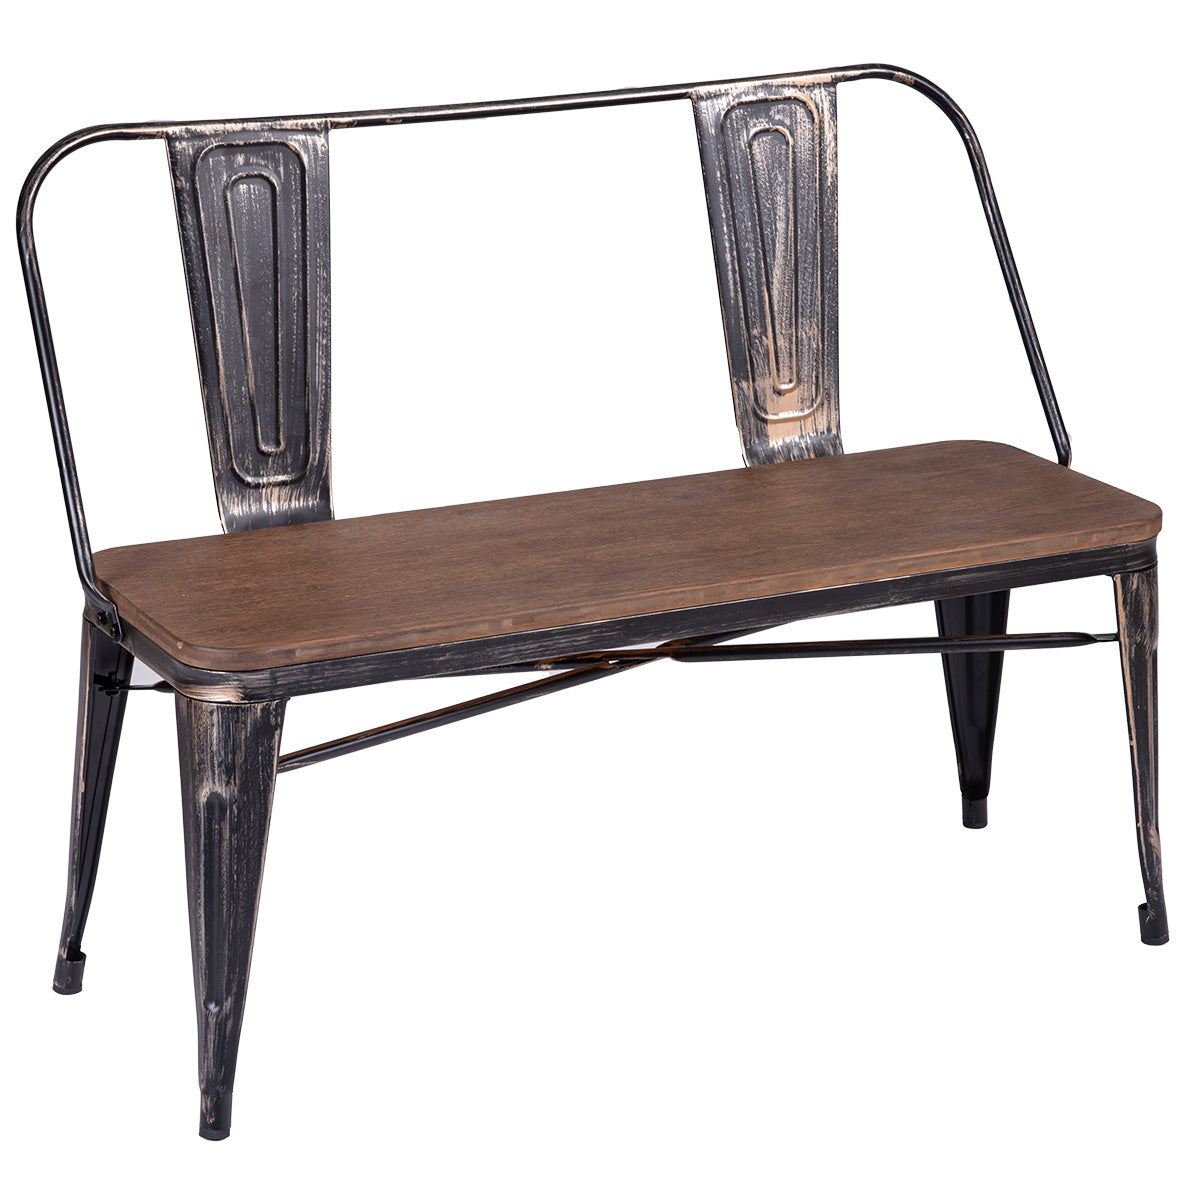 Rustic Vintage Style Distressed Dining Table Bench with Wooden Seat Panel and Metal Backrest & Legs-Boyel Living